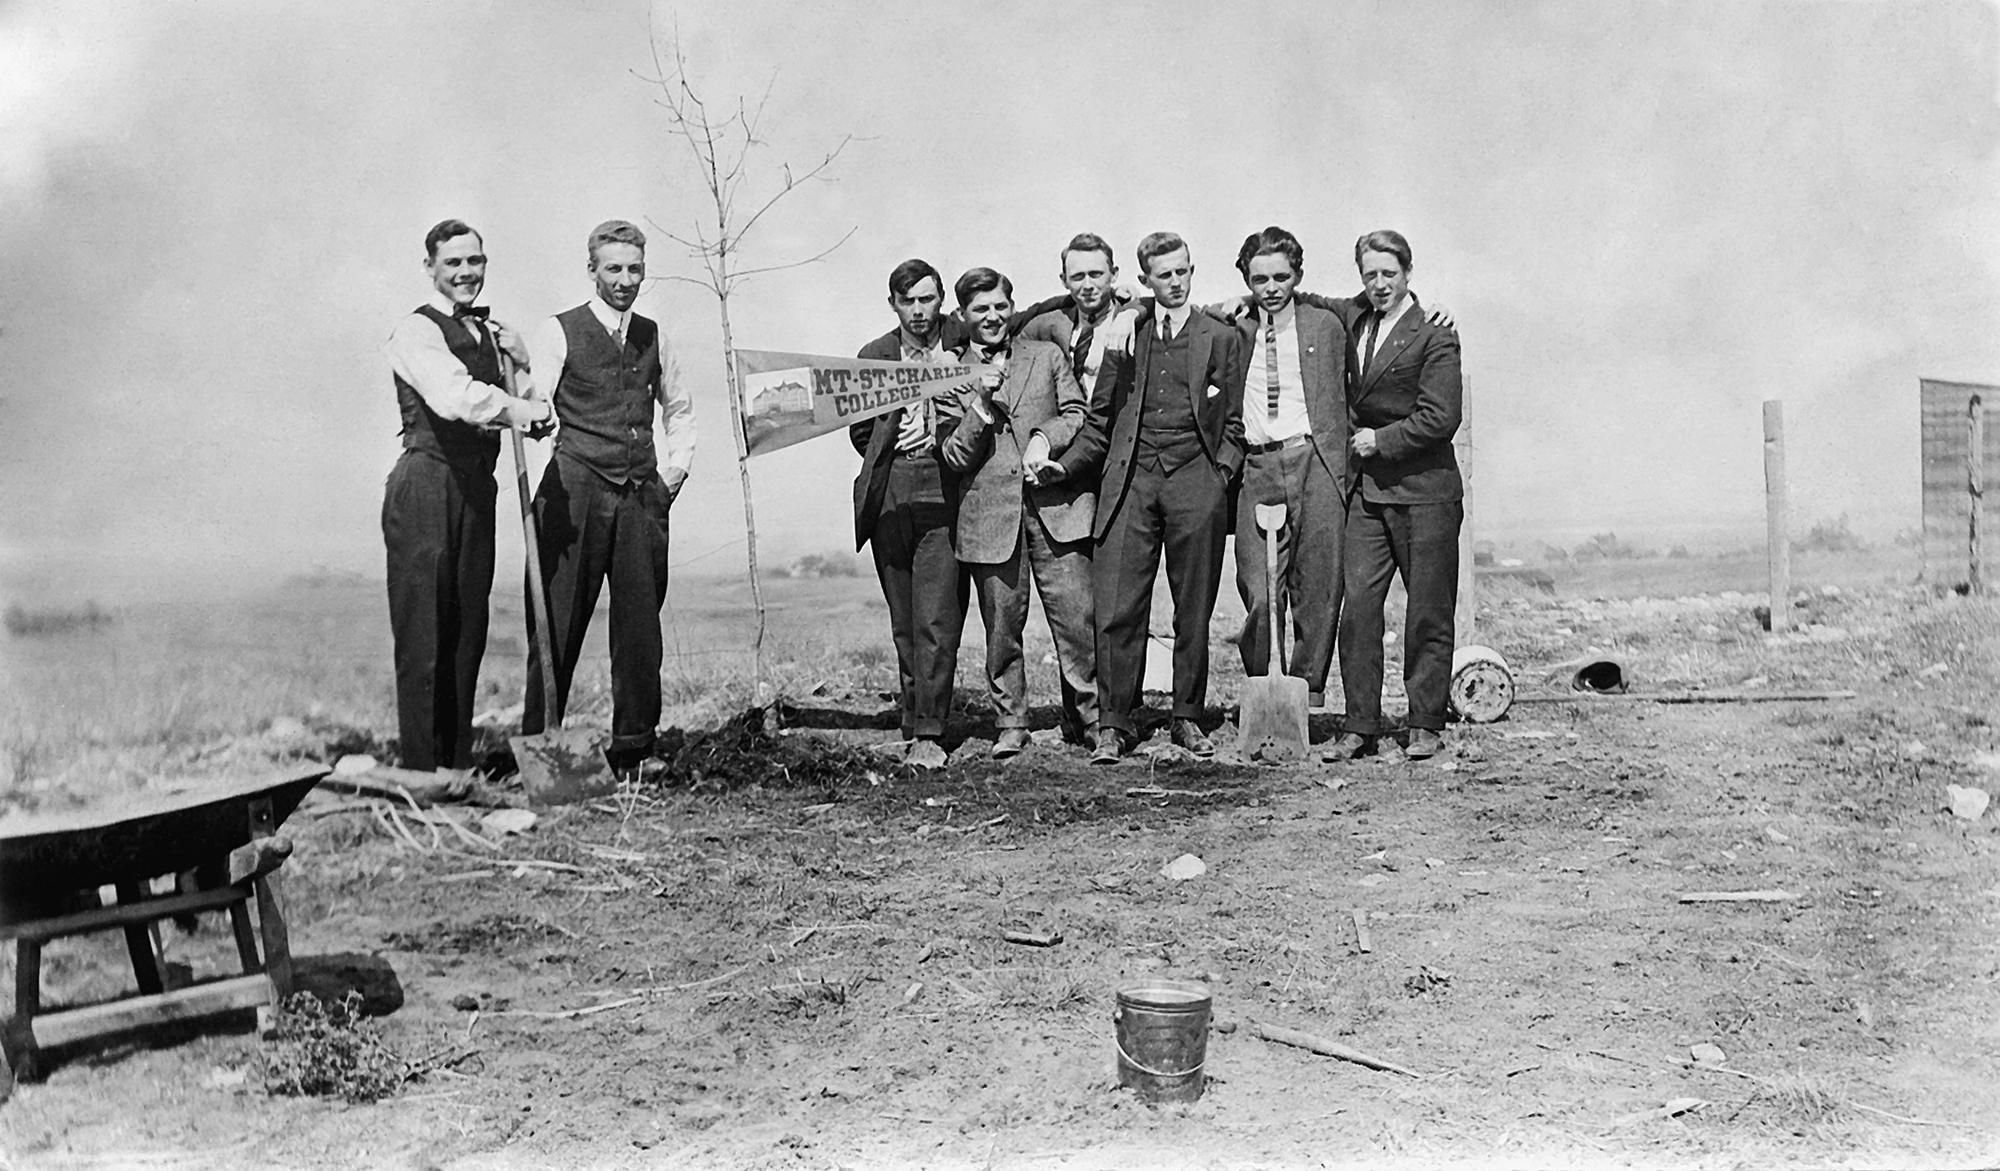 Old Image of early Carroll College Founders